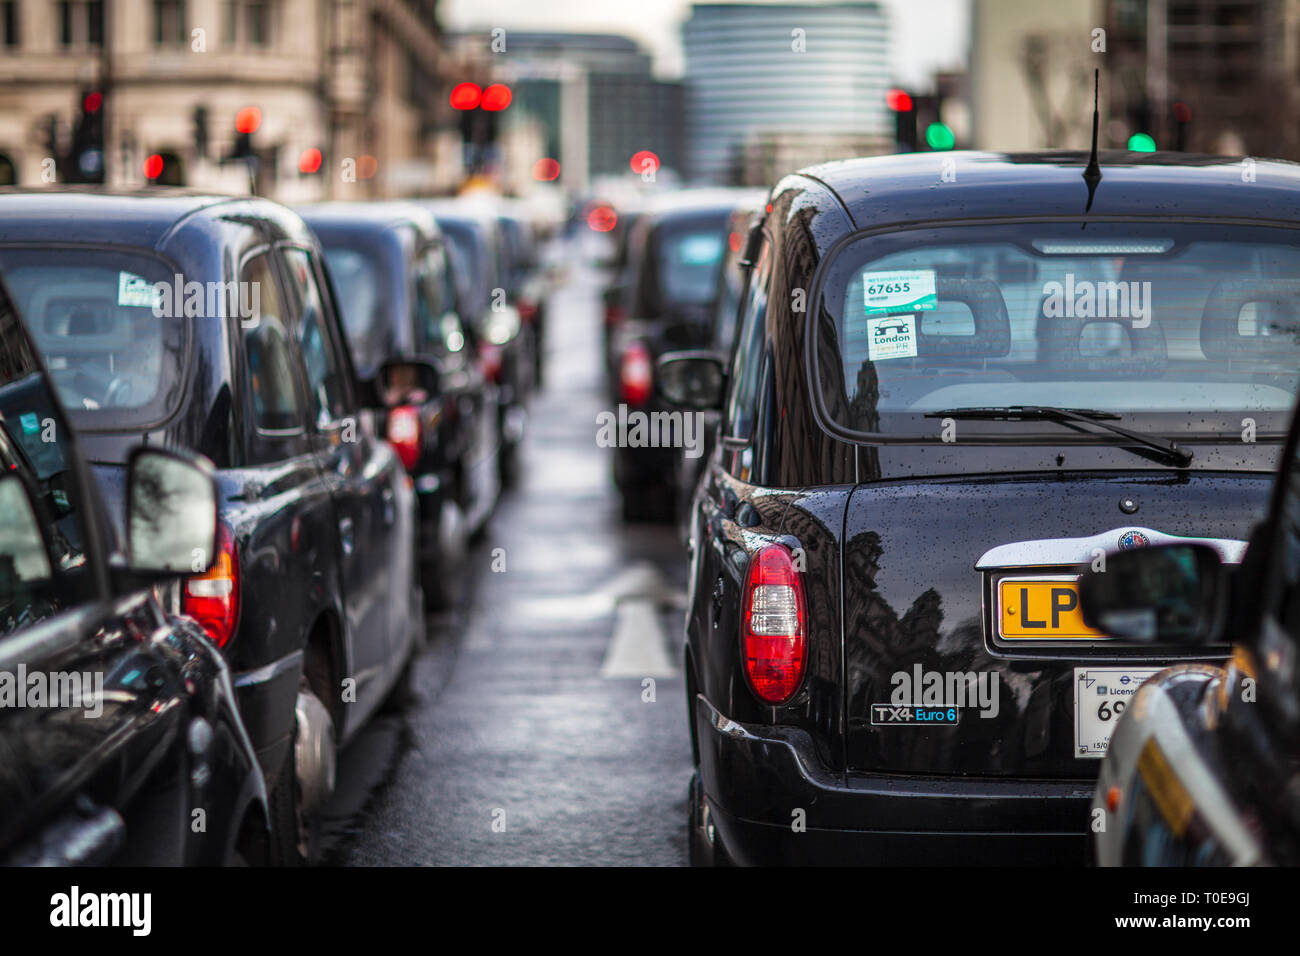 London Taxi Queue - London Taxis queue in Westminster in Central London London Black Cabs. Stock Photo